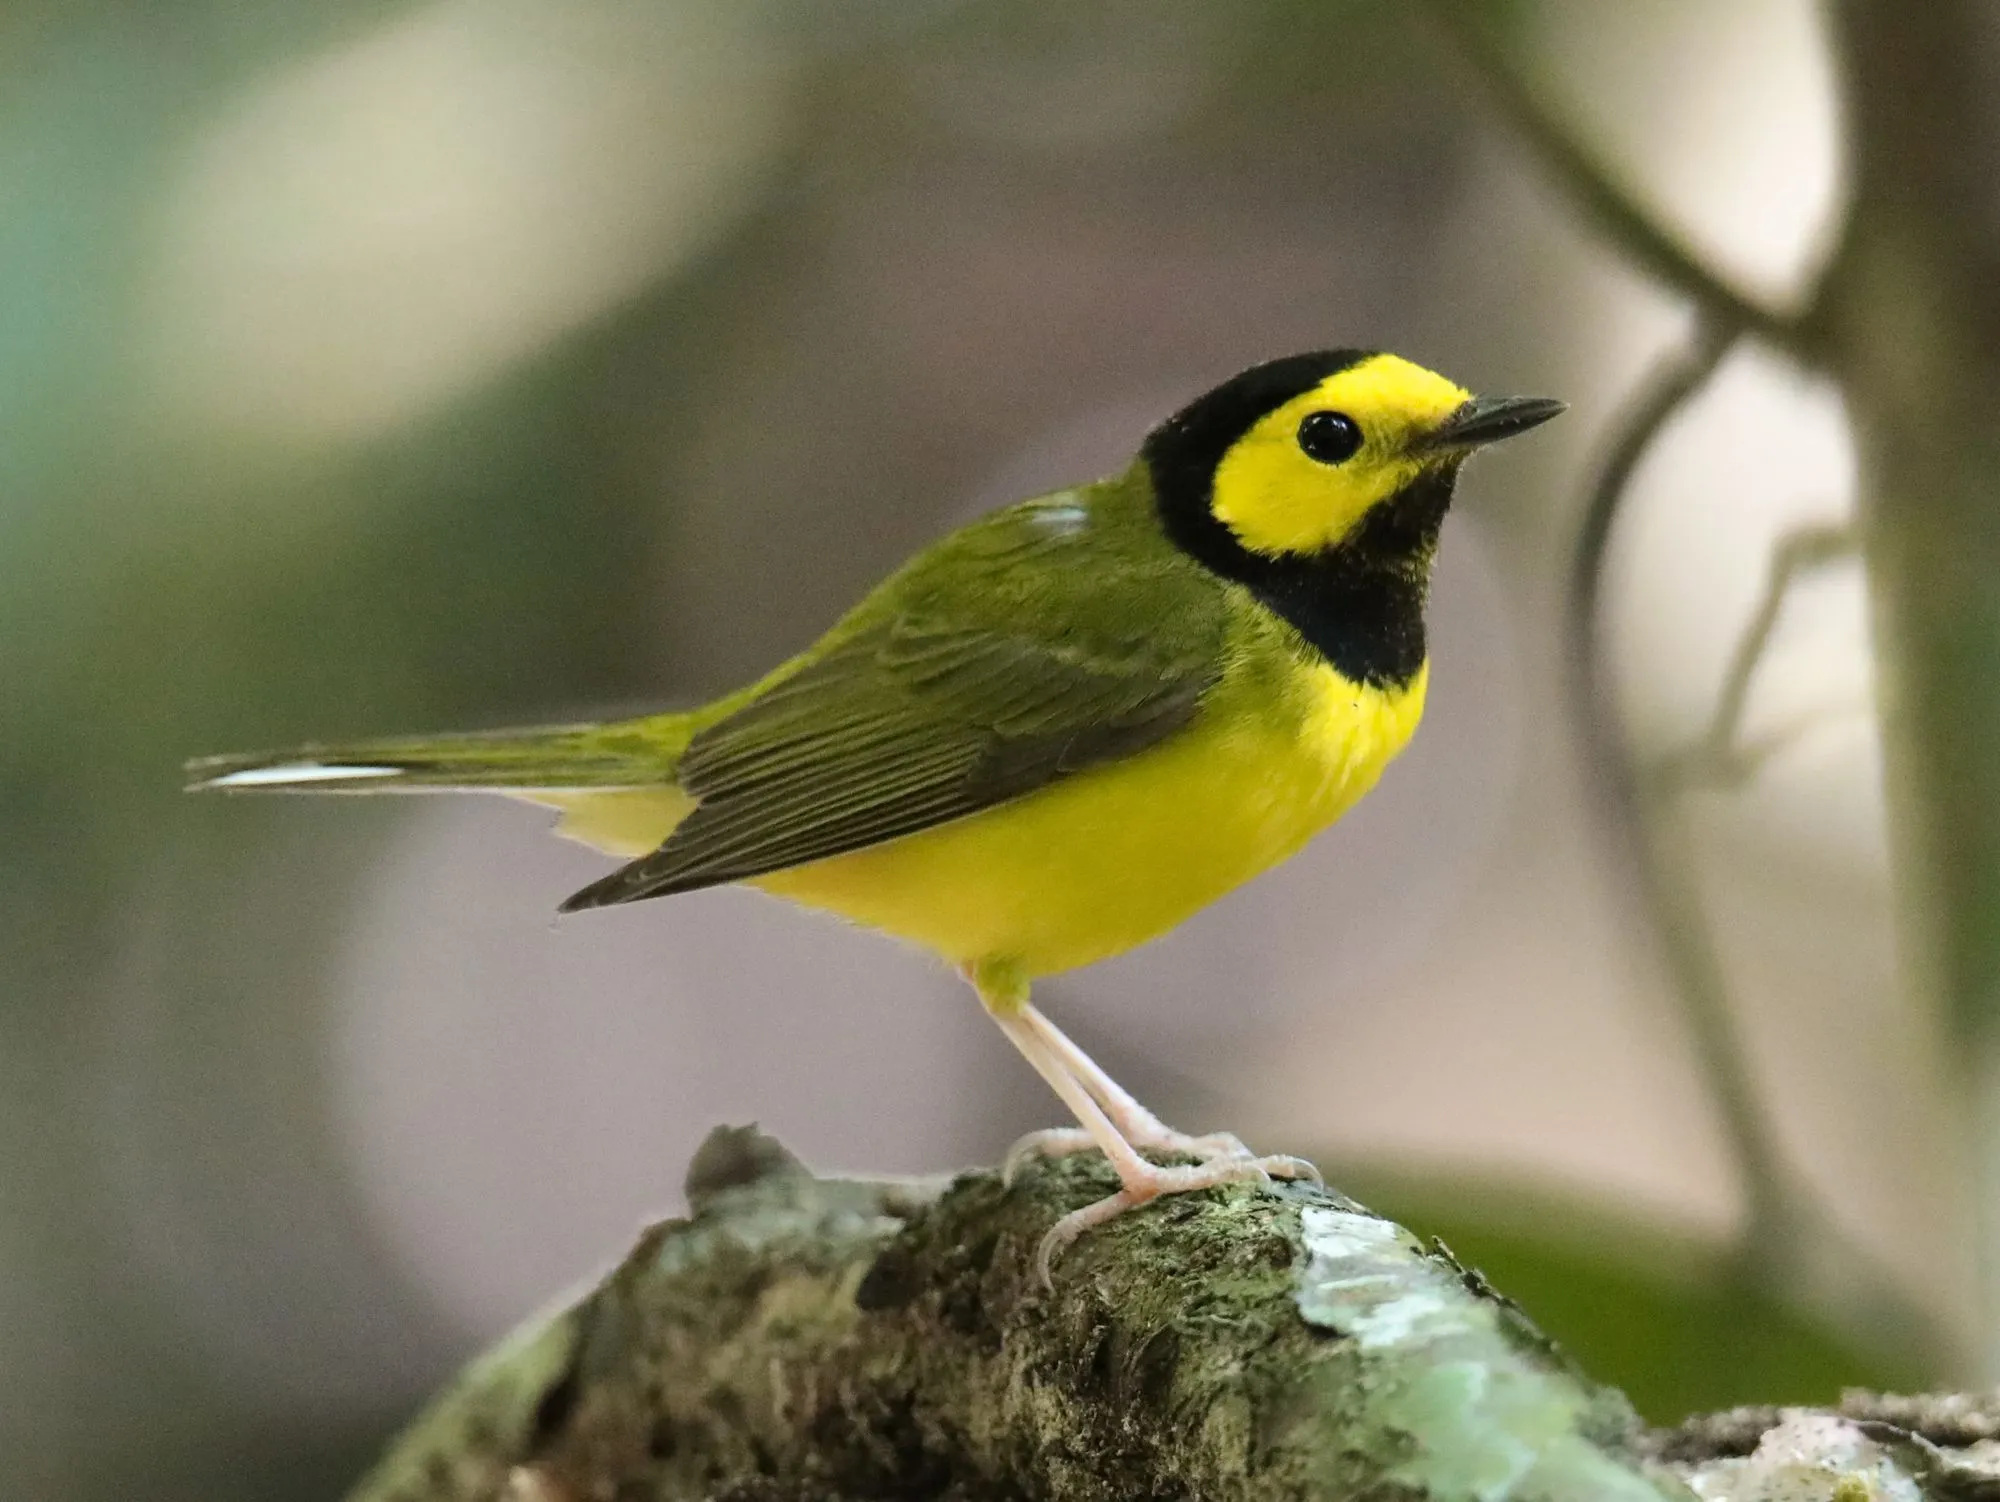 The hooded warbler's plumage is considerably different in fall than in winter.